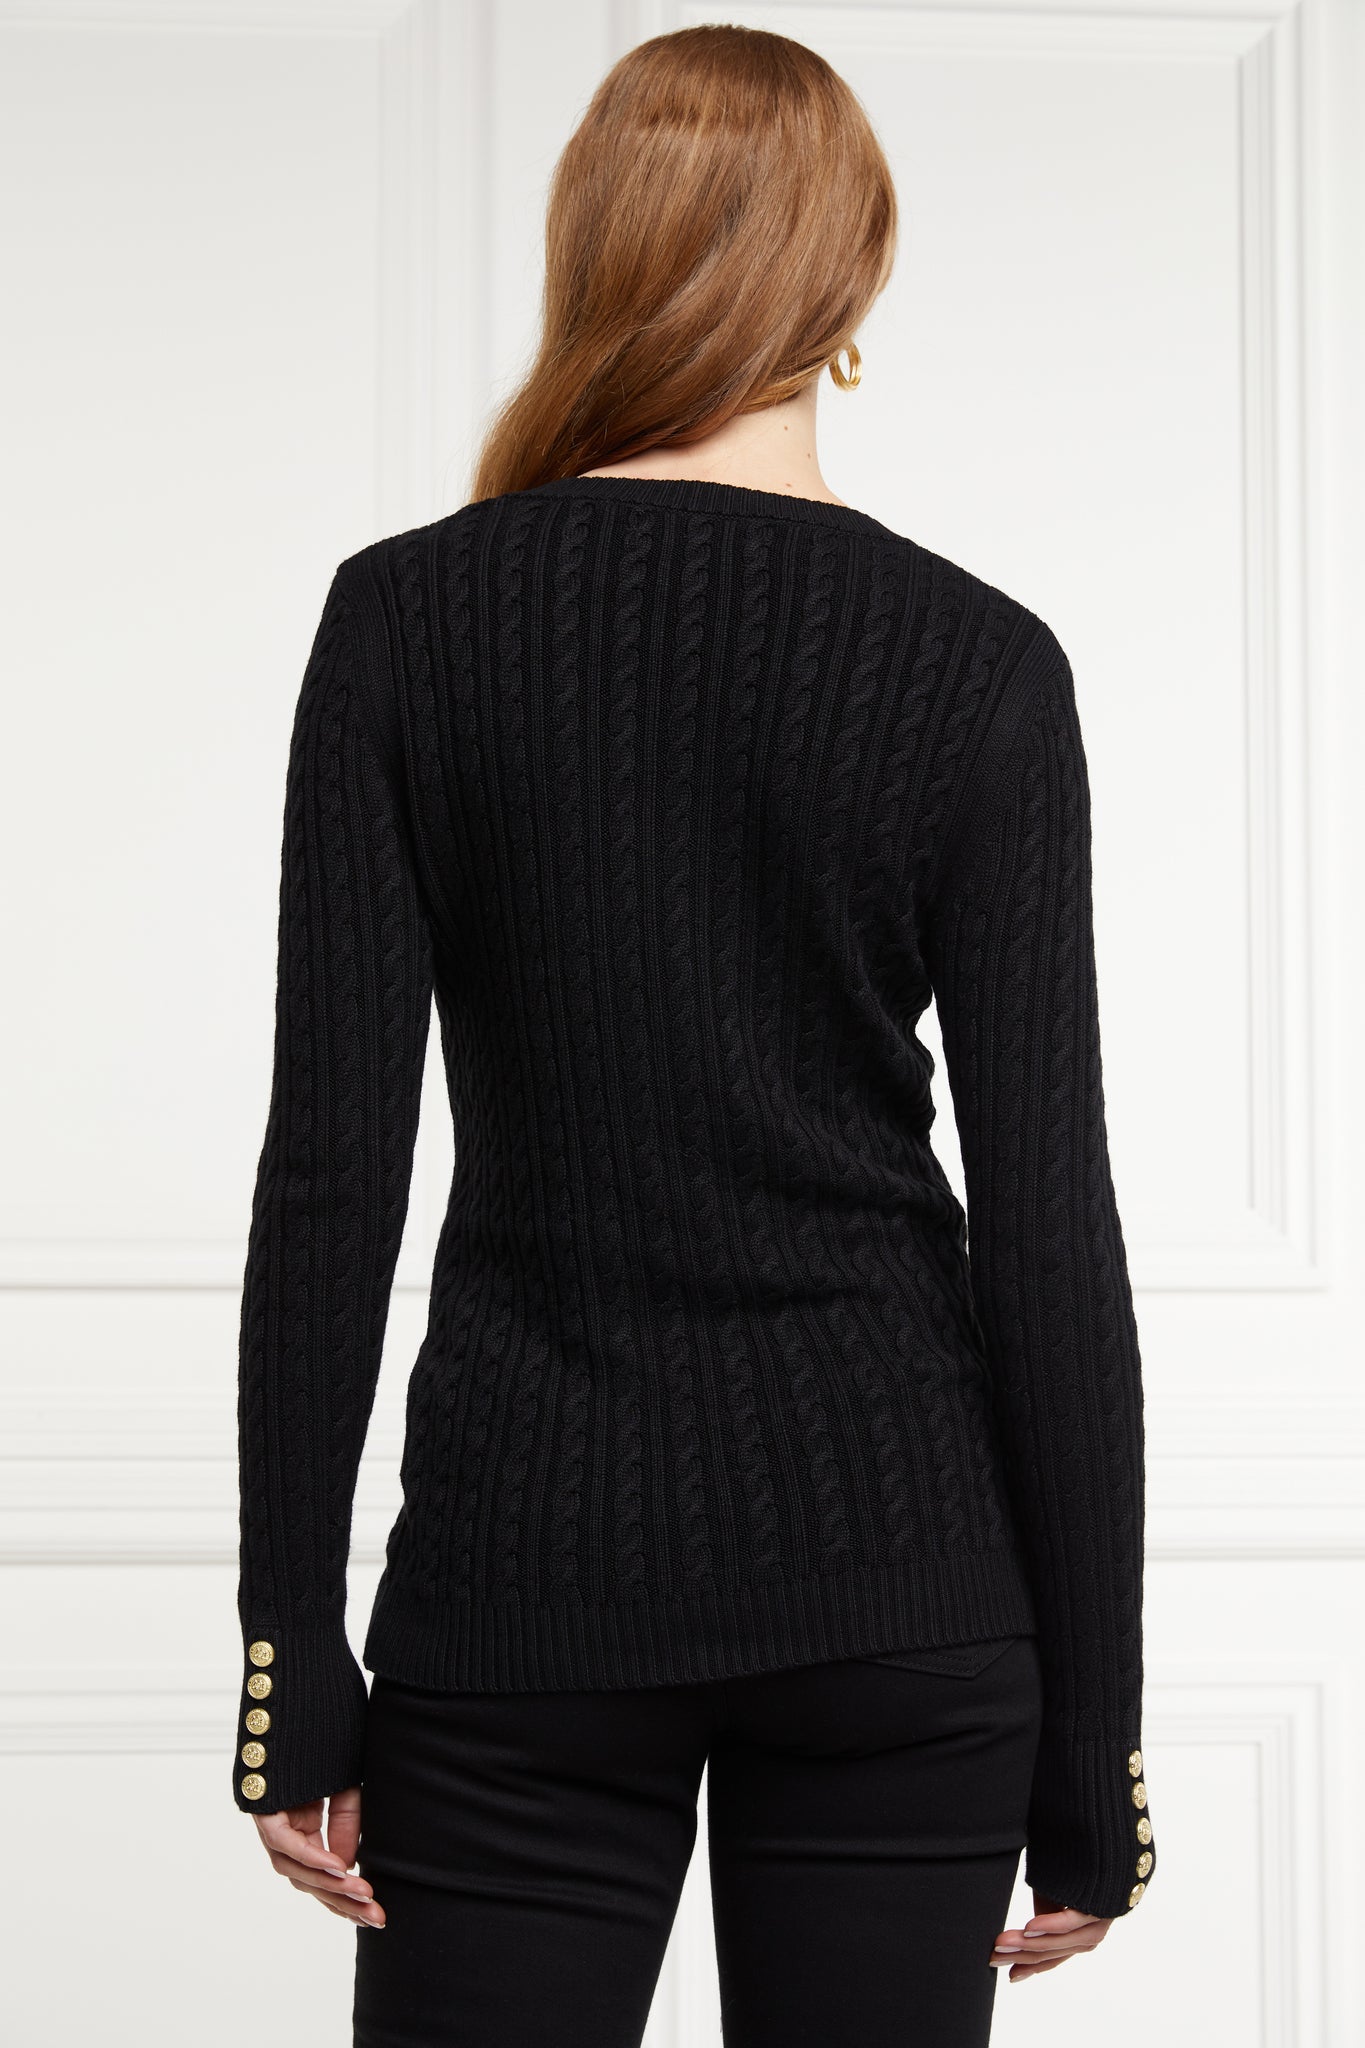 back of womens lightweight v neck cable knit jumper in black detailed with gold buttons at the cuffs